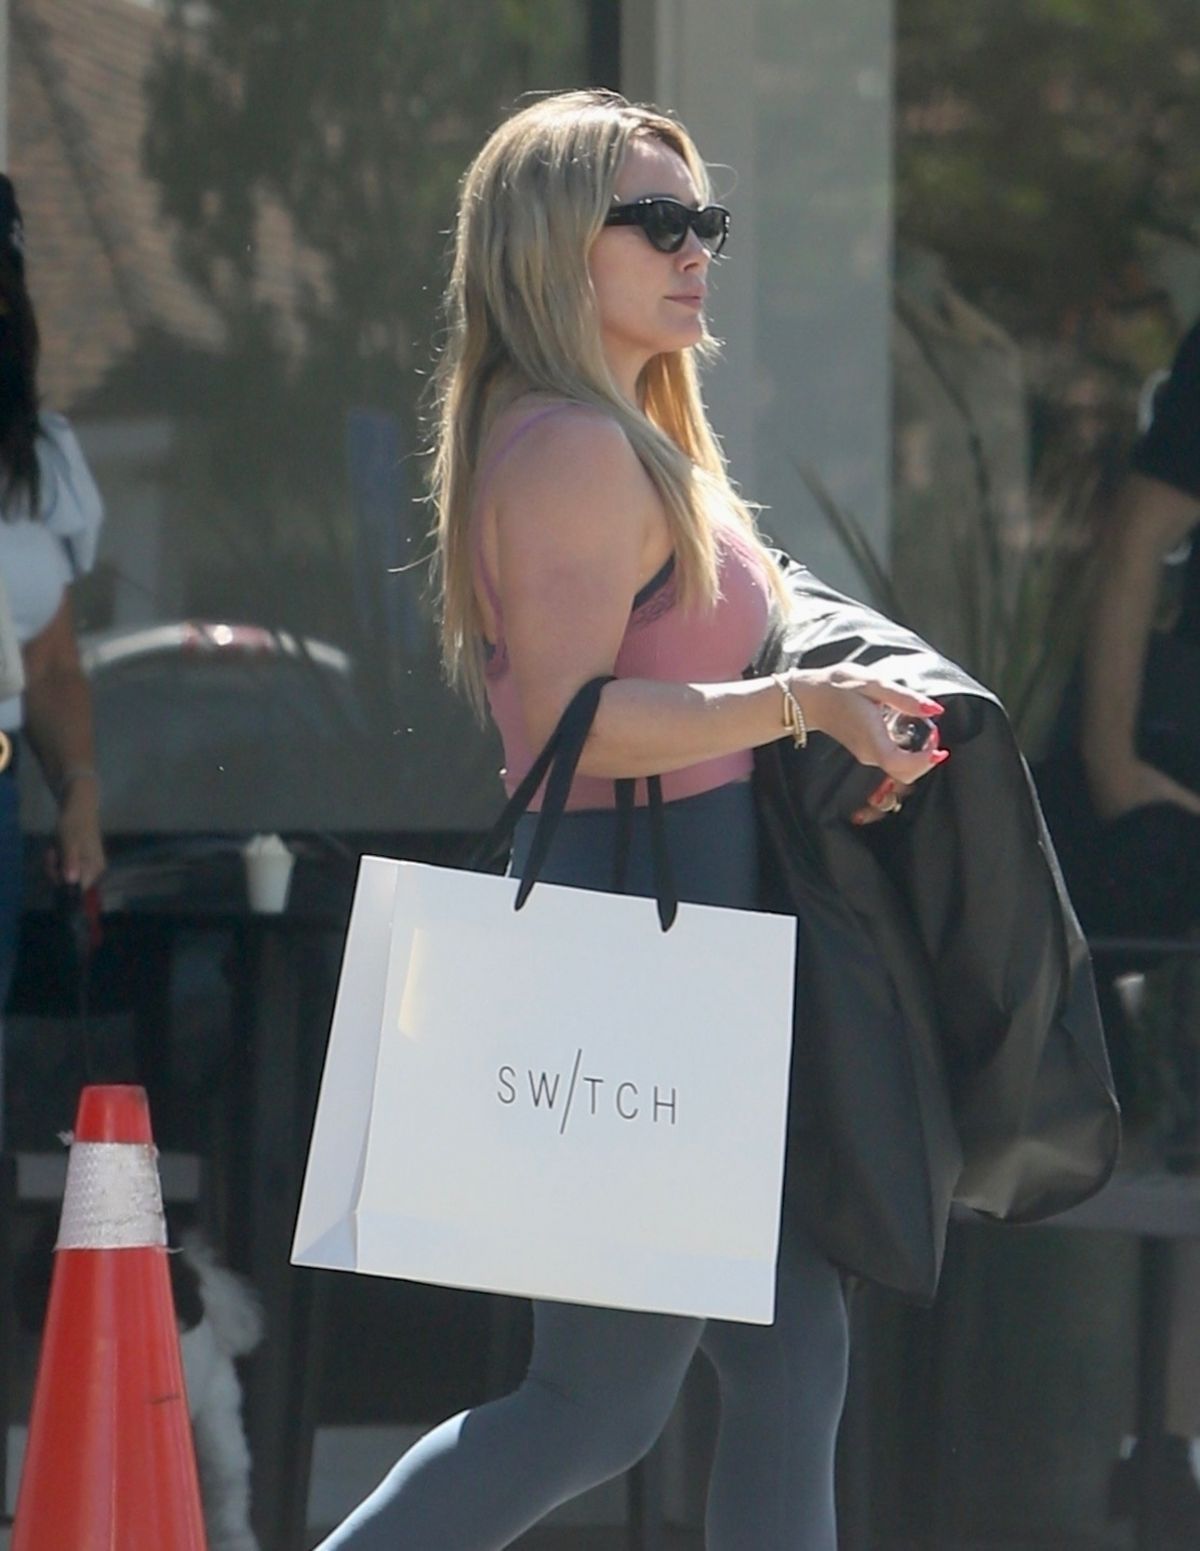 Hilary Duff Out in Santa Monica Calif August 23, 2012 – Star Style